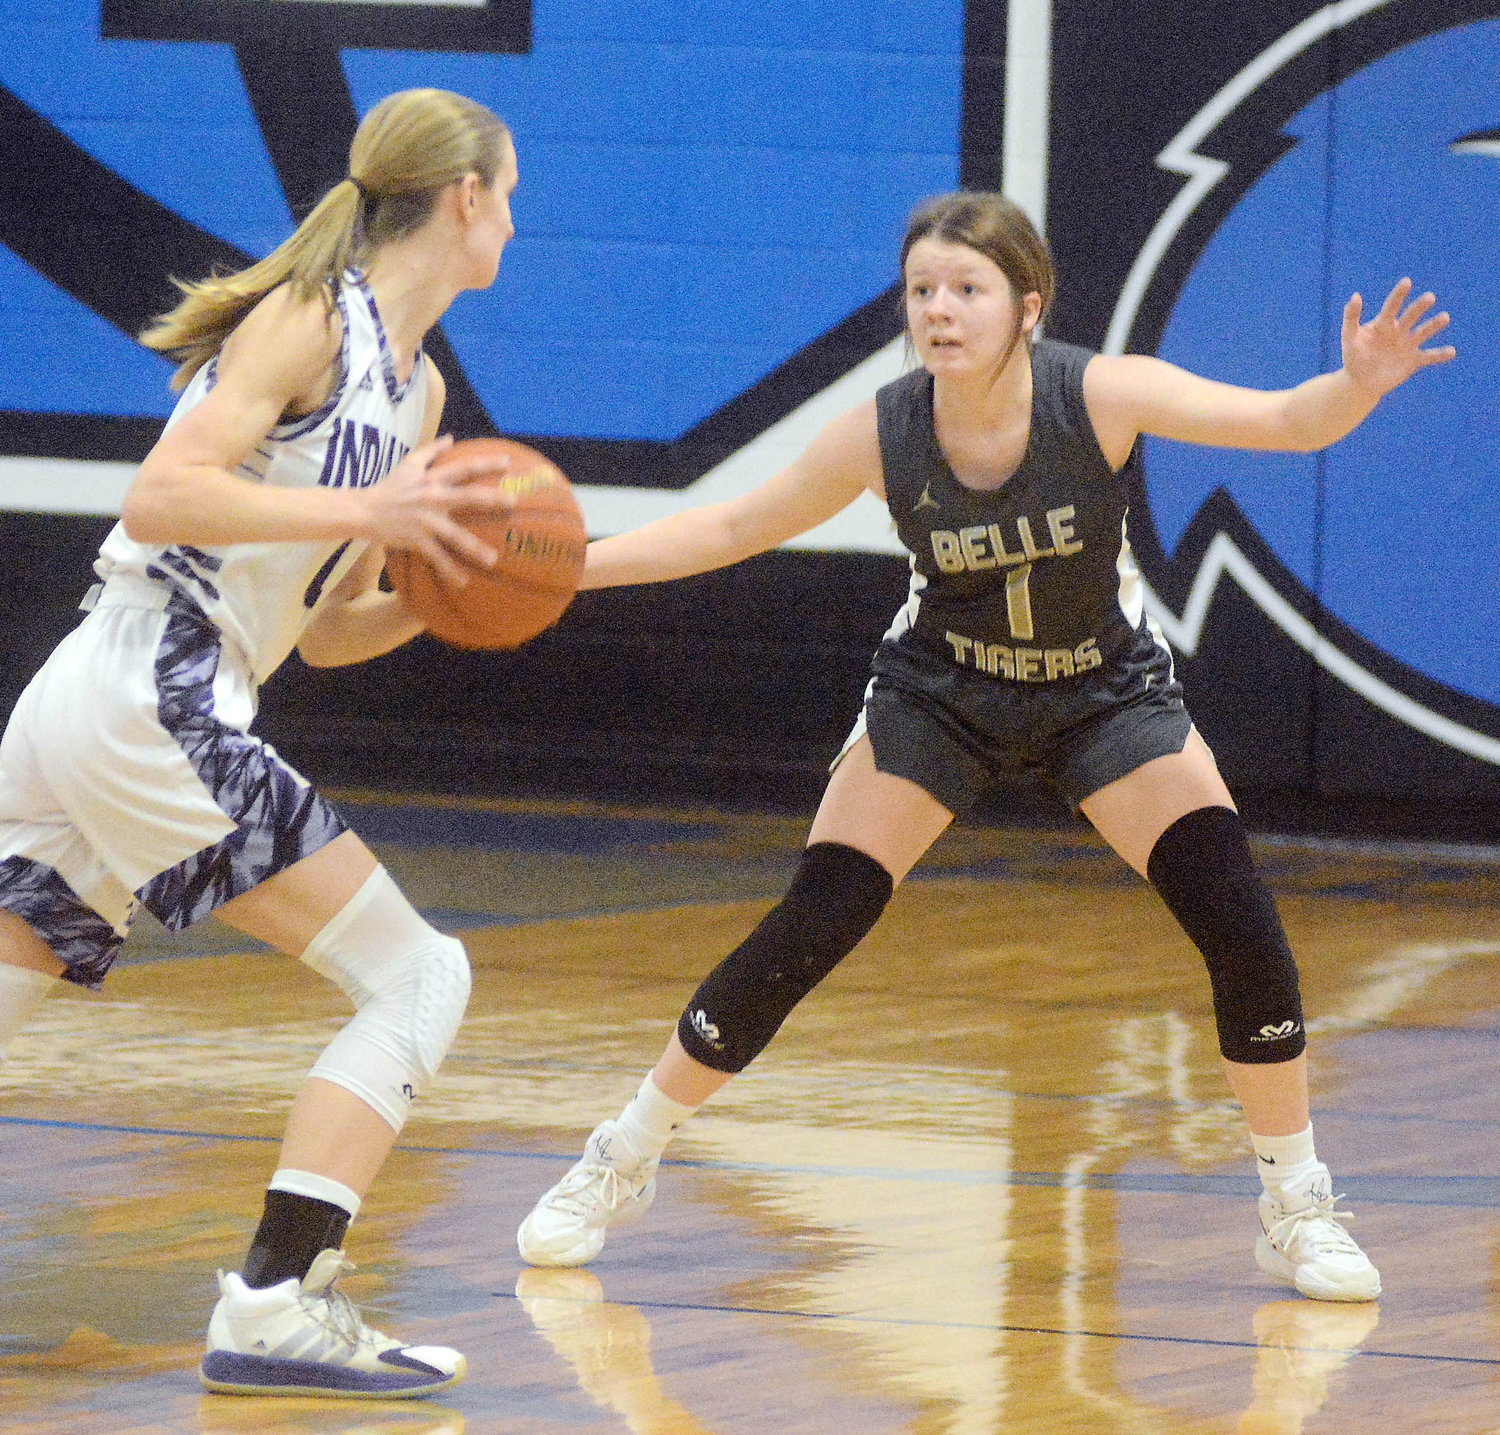 Victoria Busch (right) guards Pacific’s Trinity Brandhorst during Saturday afternoon’s third-place game at the Battle in Bourbon Girls Basketball Tournament in which Belle suffered a 33-28 setback.